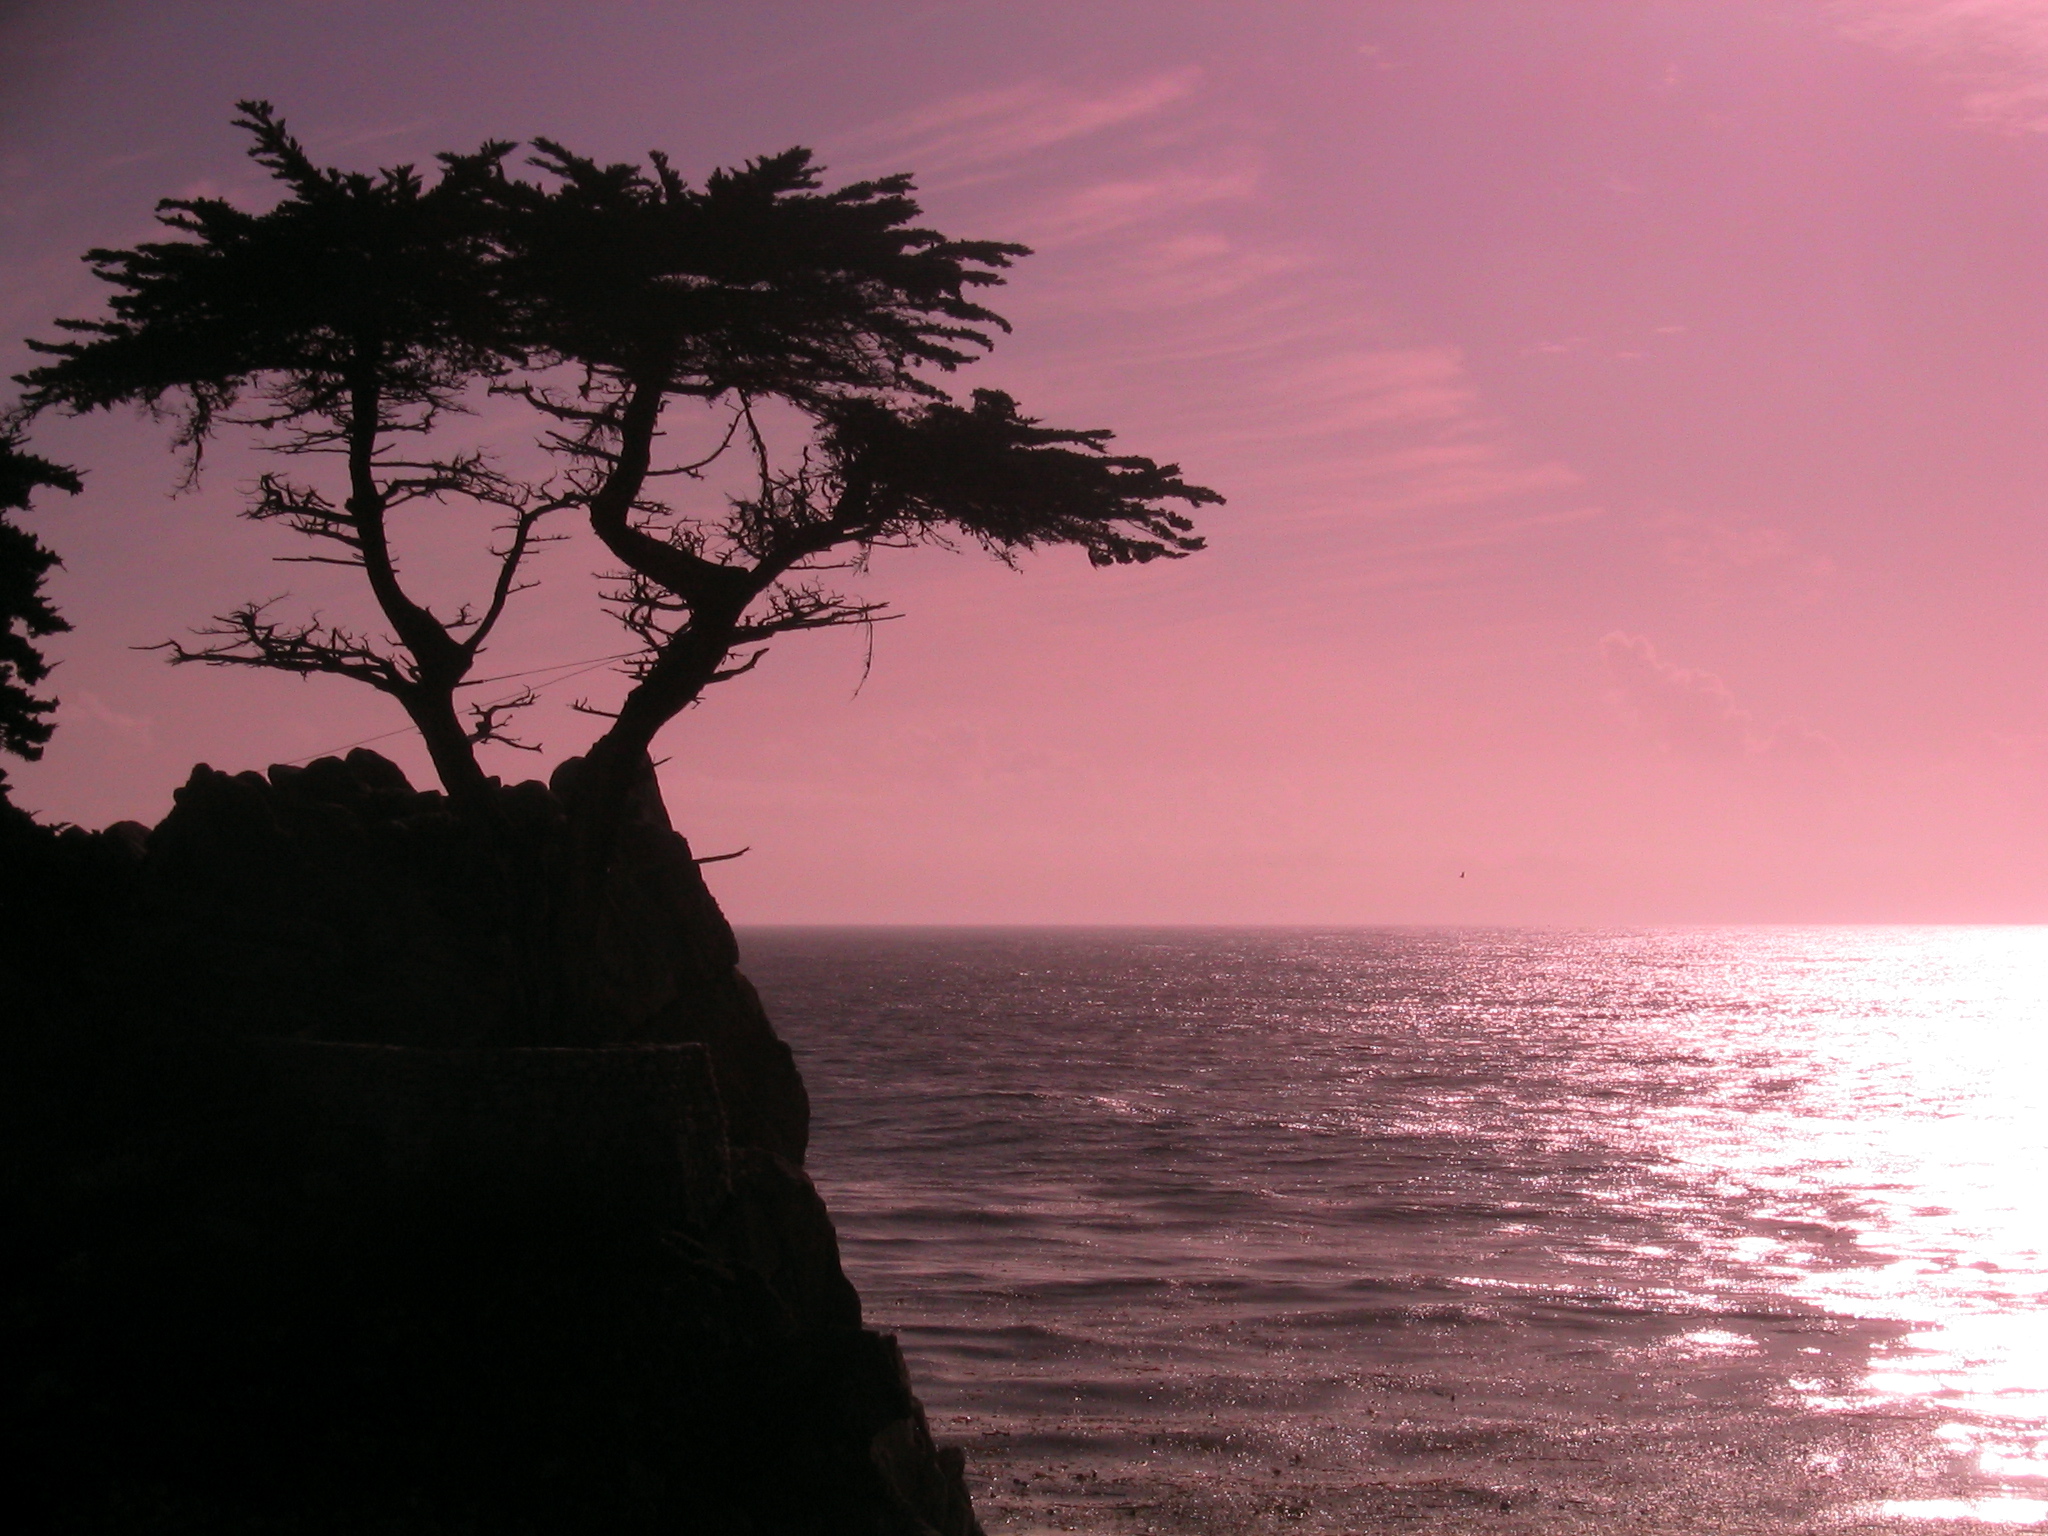 Sunset at cyprus point on pebble beach